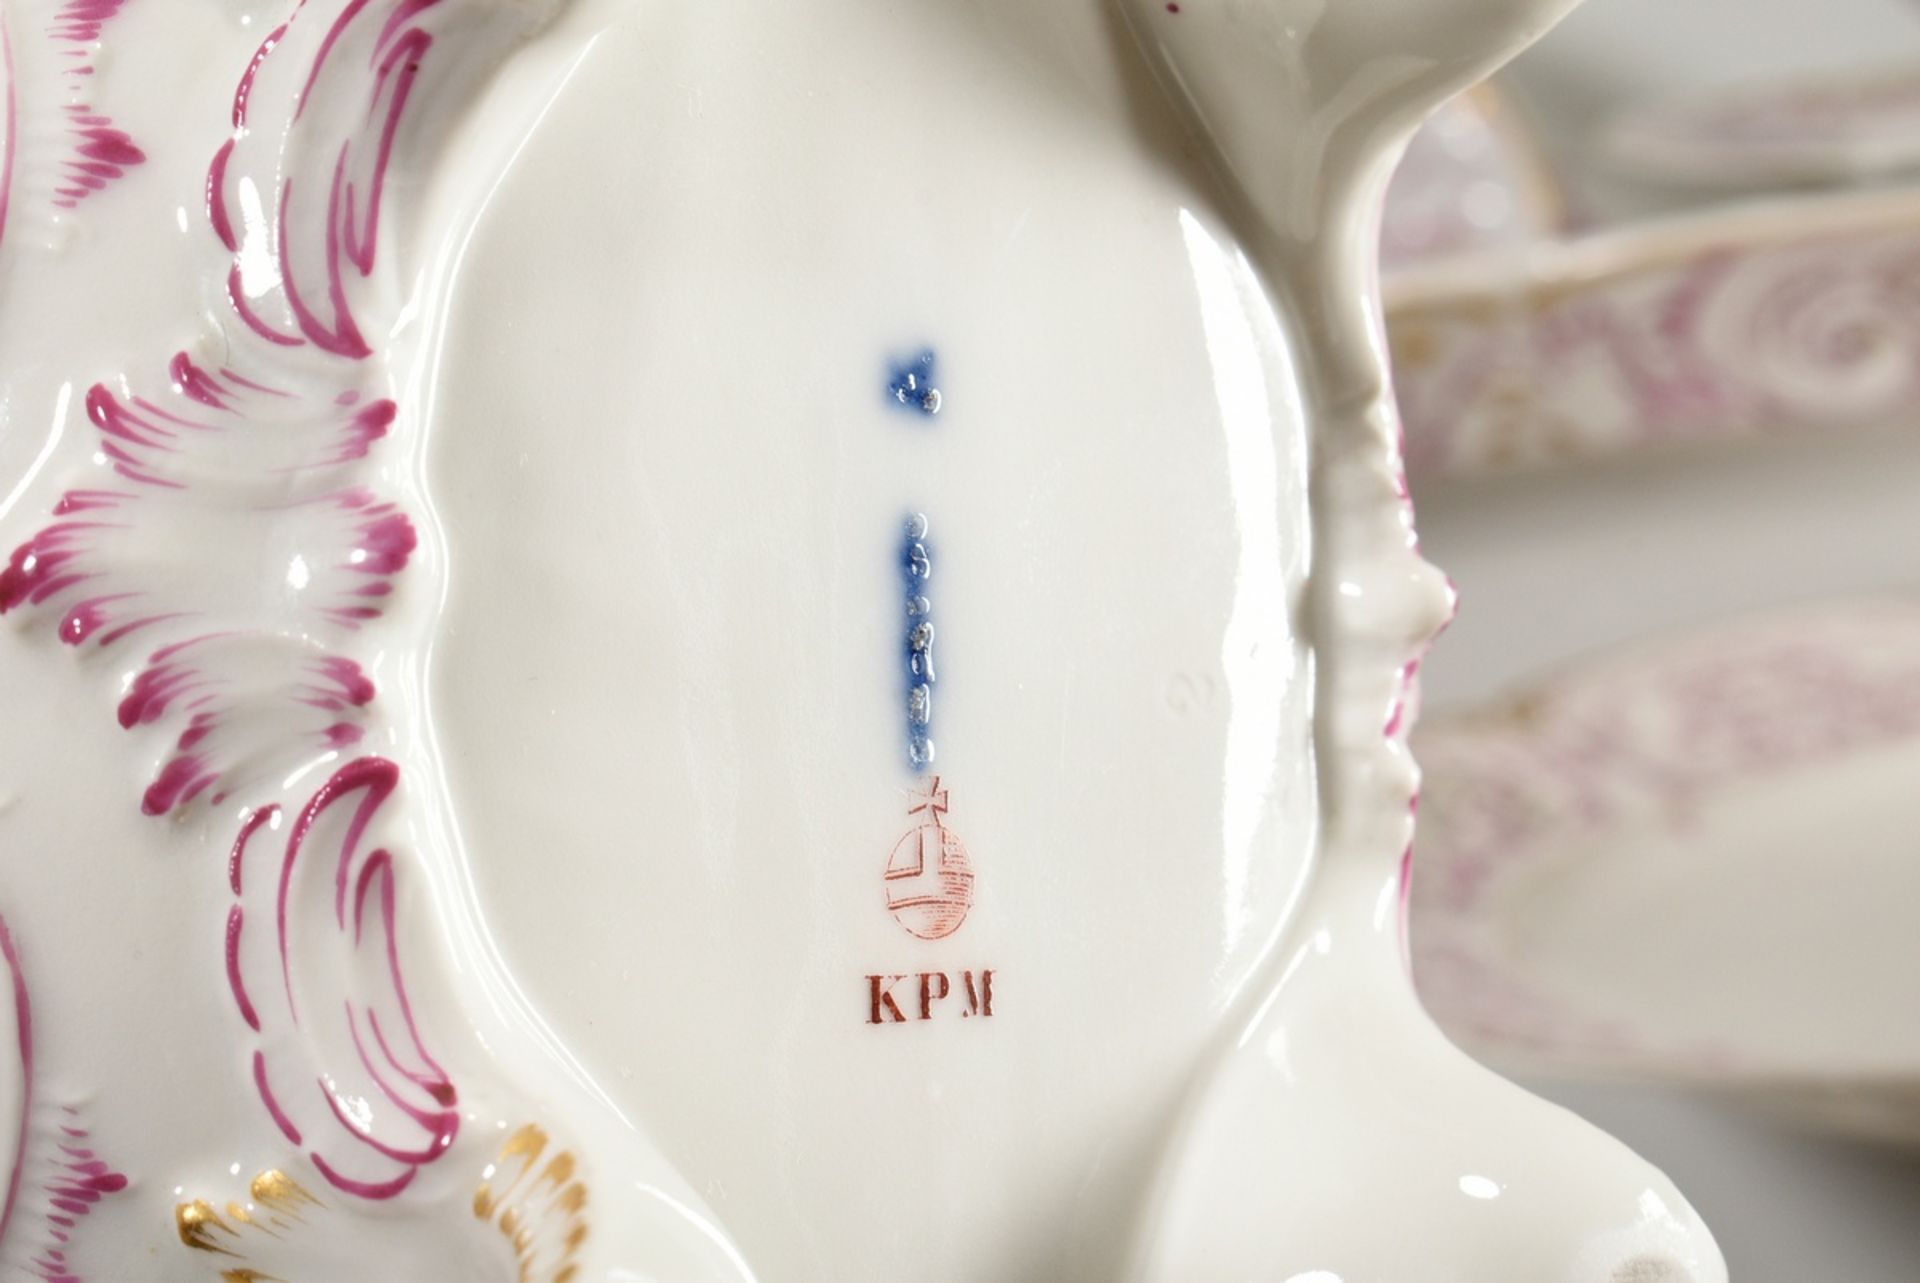 69 Pieces KPM dinner service in Rococo form with purple and gold staffage, red imperial orb mark, c - Image 11 of 22